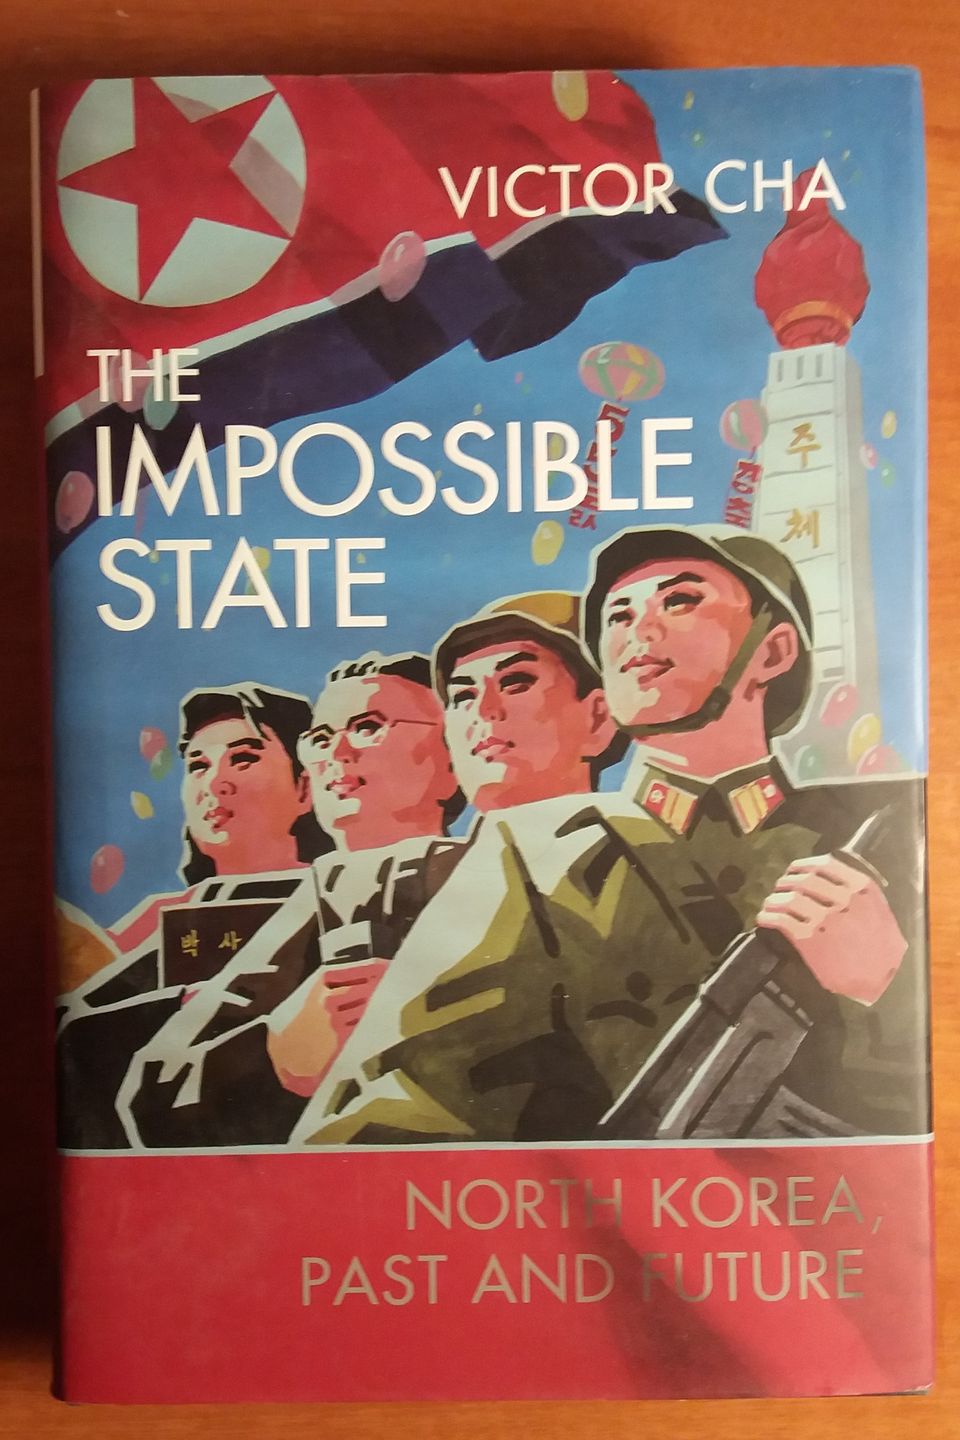 Victor Cha The Impossible State - NORTH KOREA Past and Future